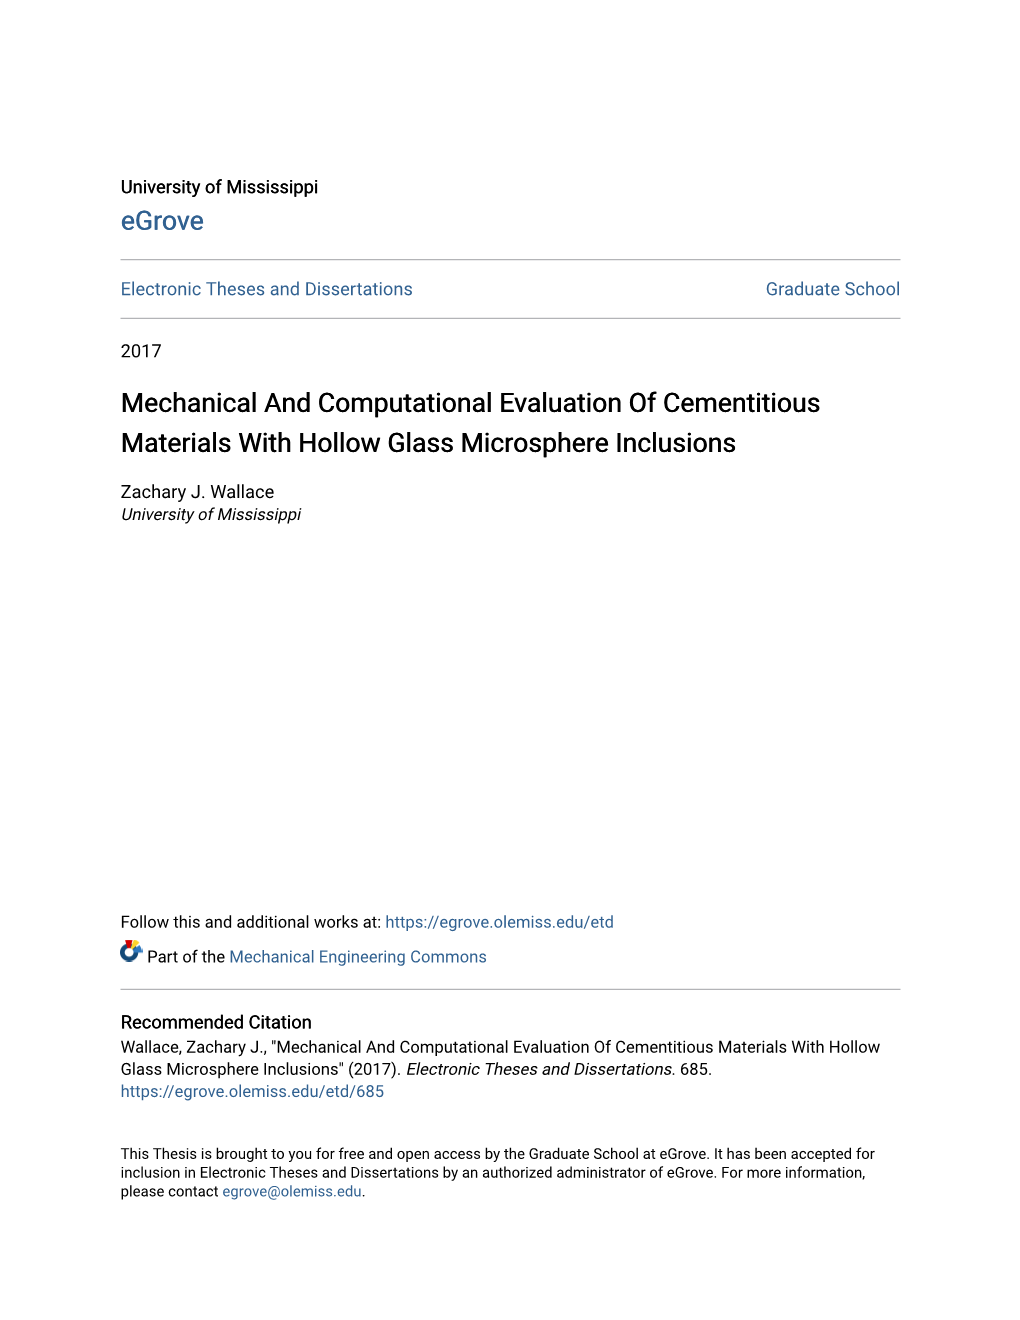 Mechanical and Computational Evaluation of Cementitious Materials with Hollow Glass Microsphere Inclusions